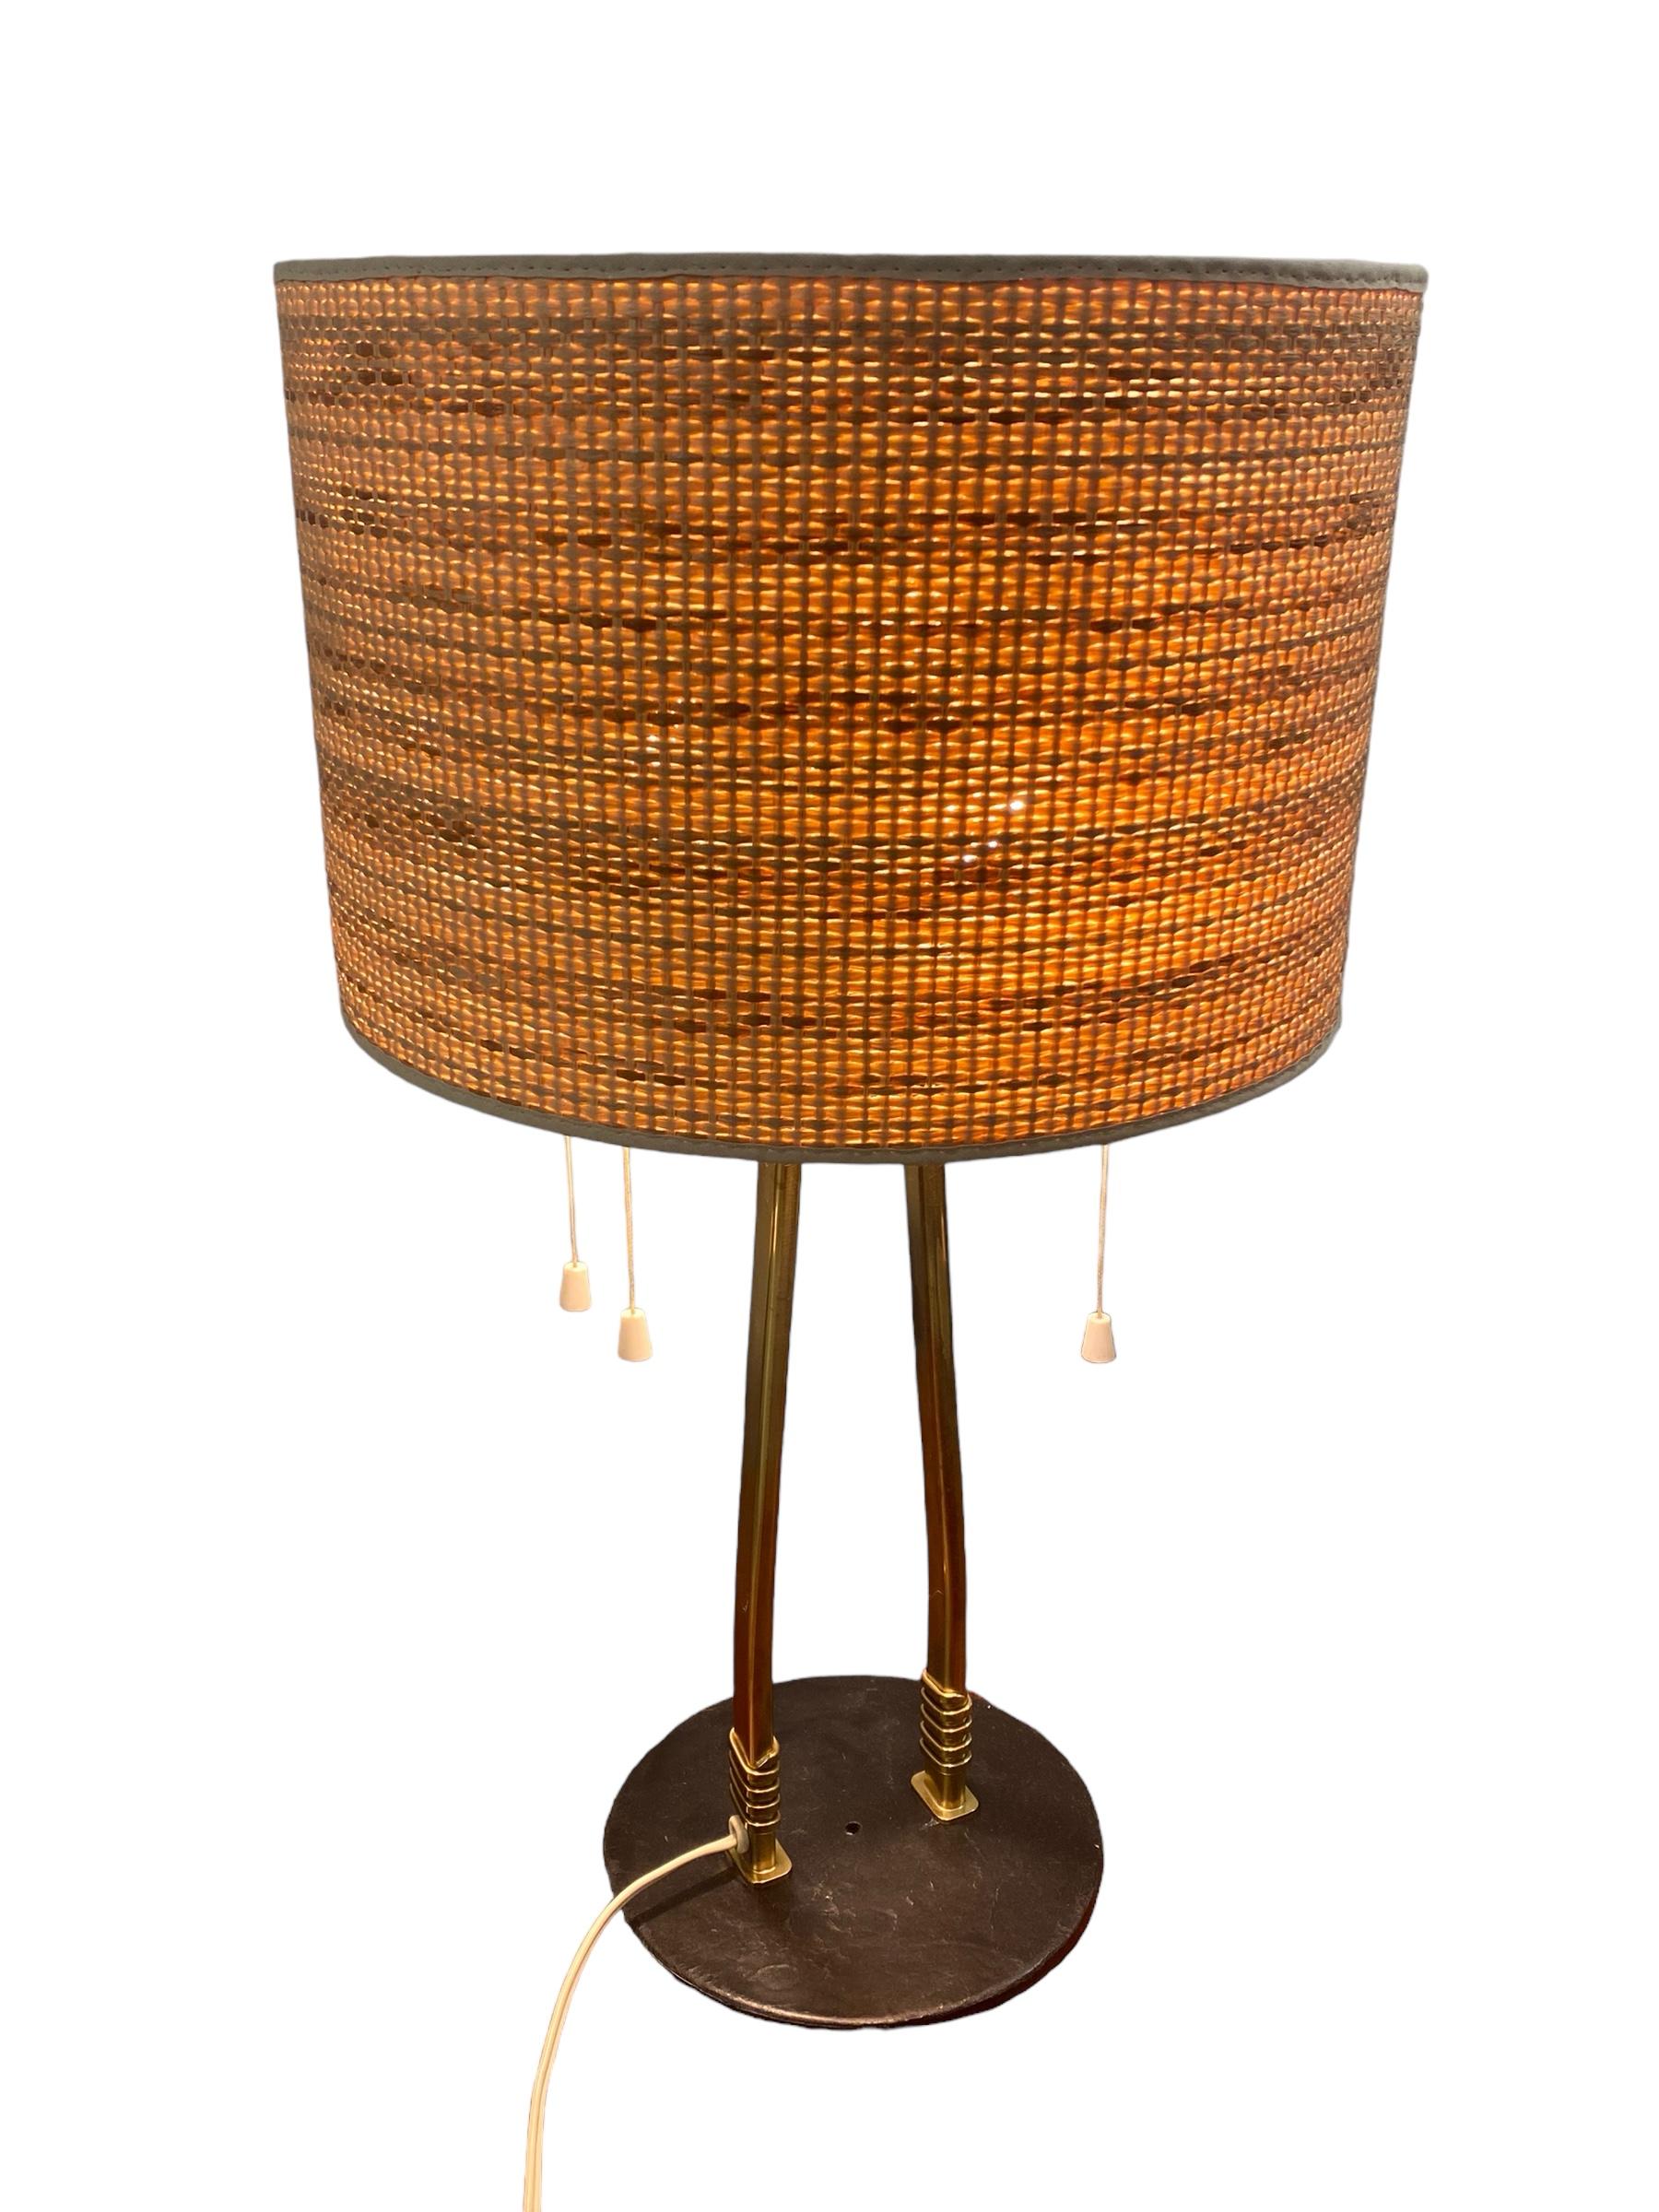 A very rare comissioned table lamp designed in the early 1950s for Taito Oy. This design has been used in a similar yet smaller table lamp in the iconic Vaakuna hotel that was exclusively designed by Tynell (the lighting). It has a metal base